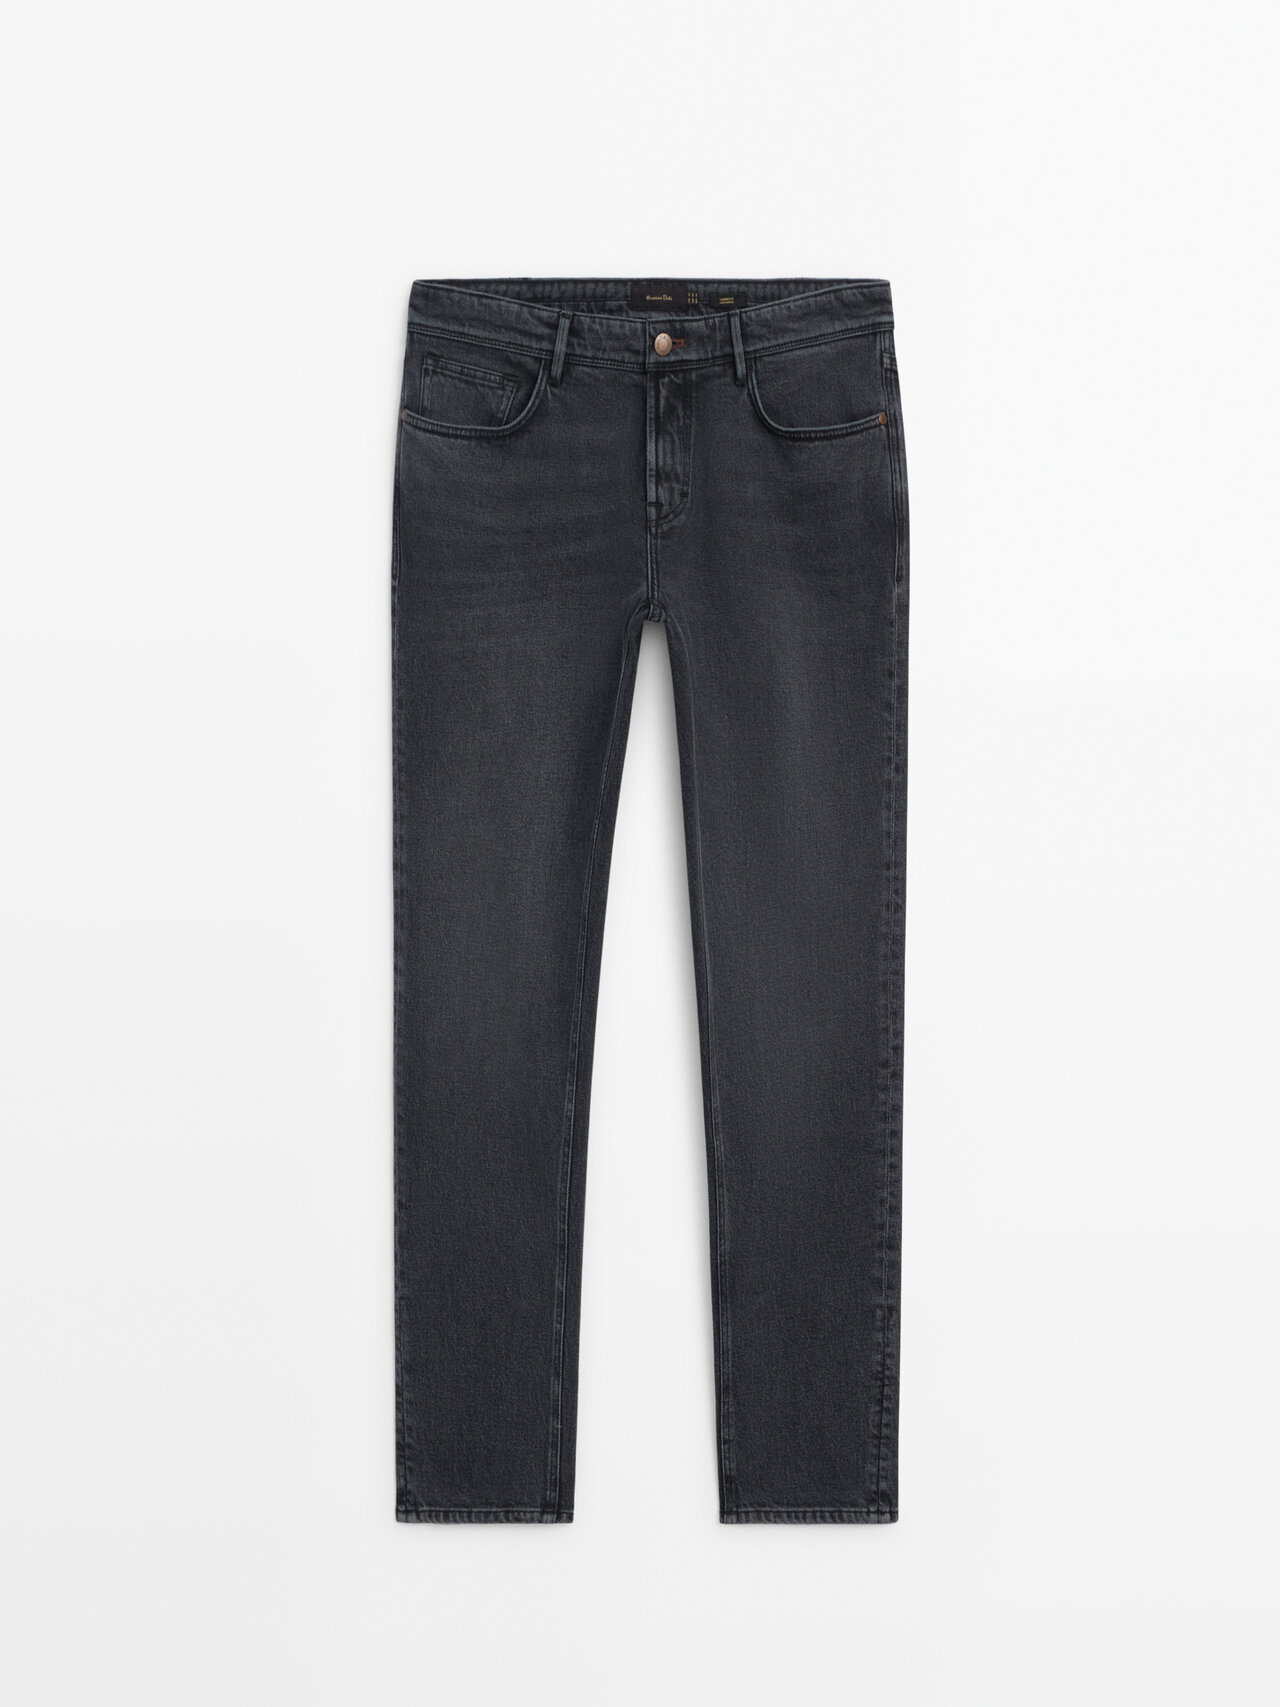 Massimo Dutti Tapered Fit Jeans In Charcoal